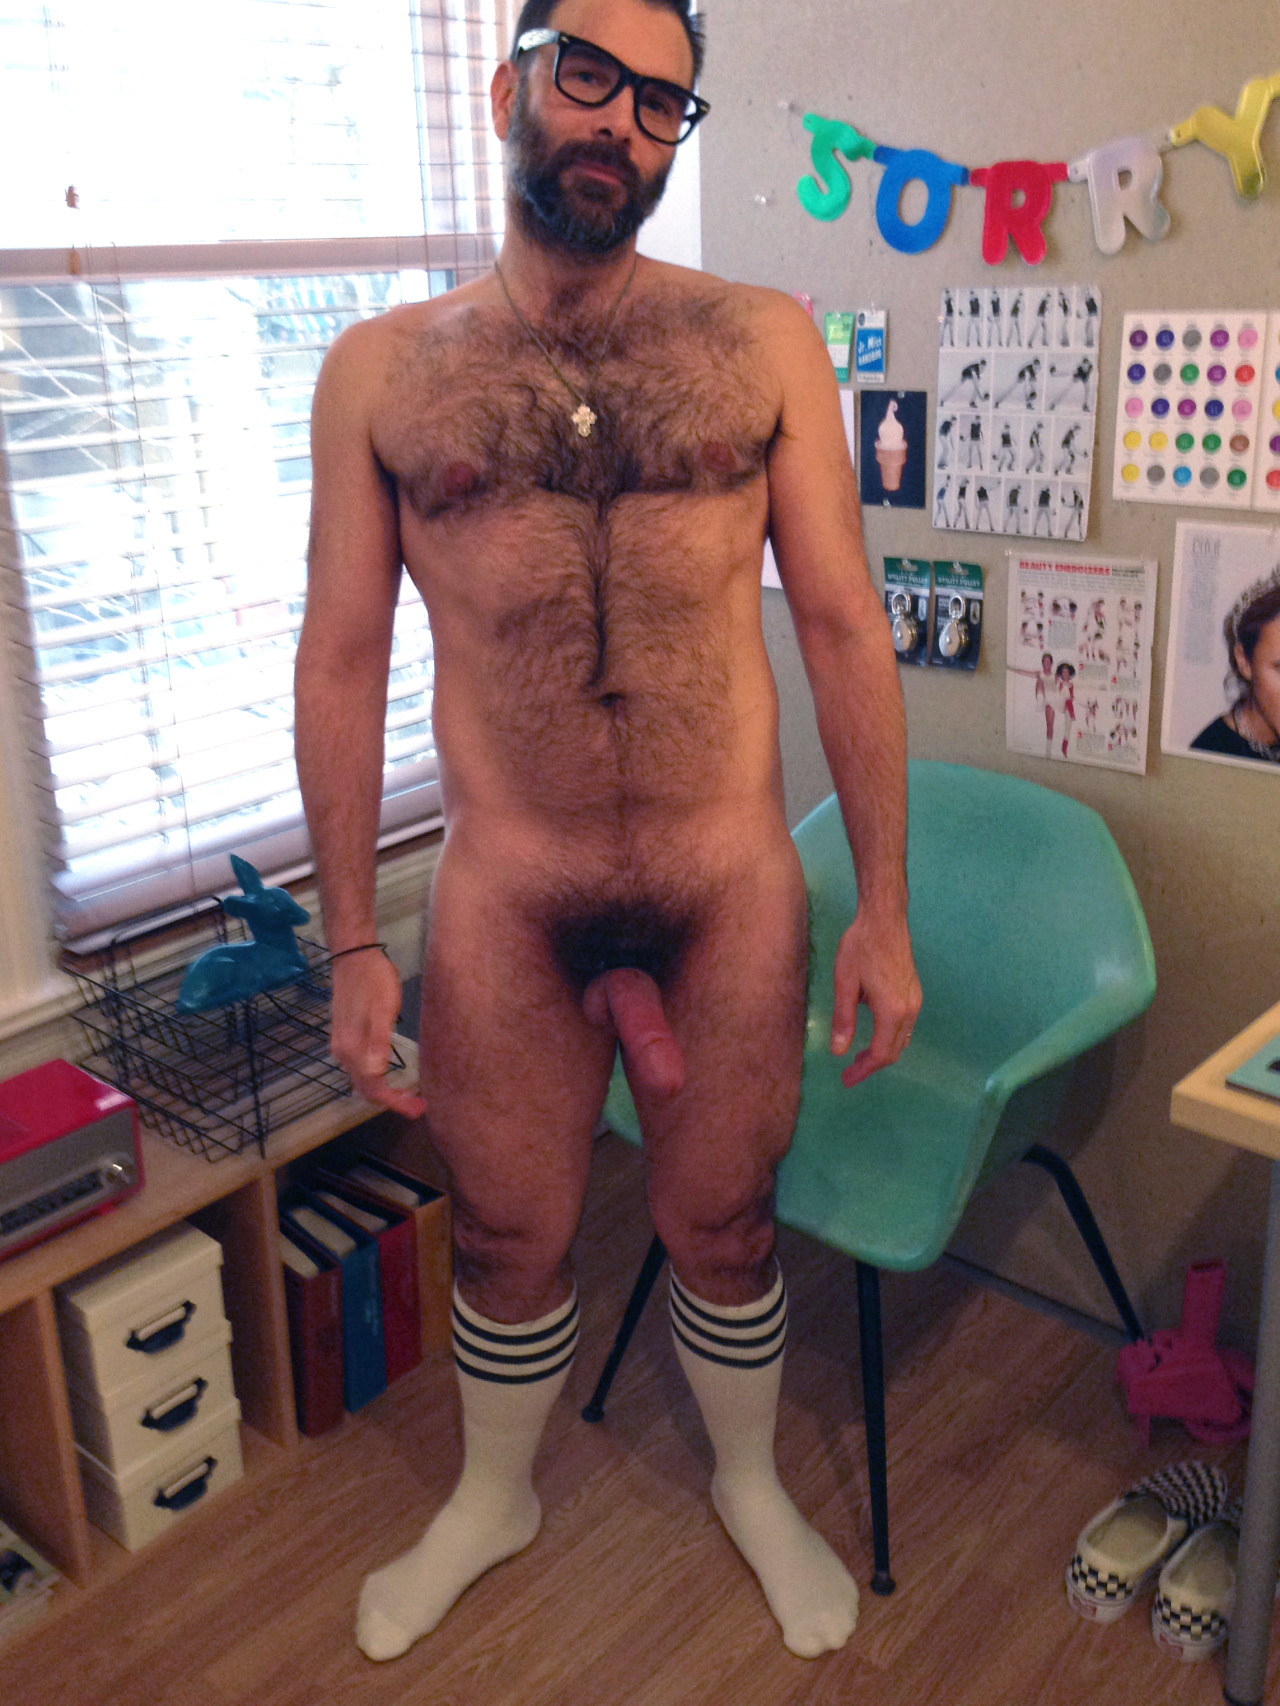 backfur:

Click here to follow Backfur for daily updates of HAIRY/BEEF/HORNY/DADDY
Your daily dose of Fur
